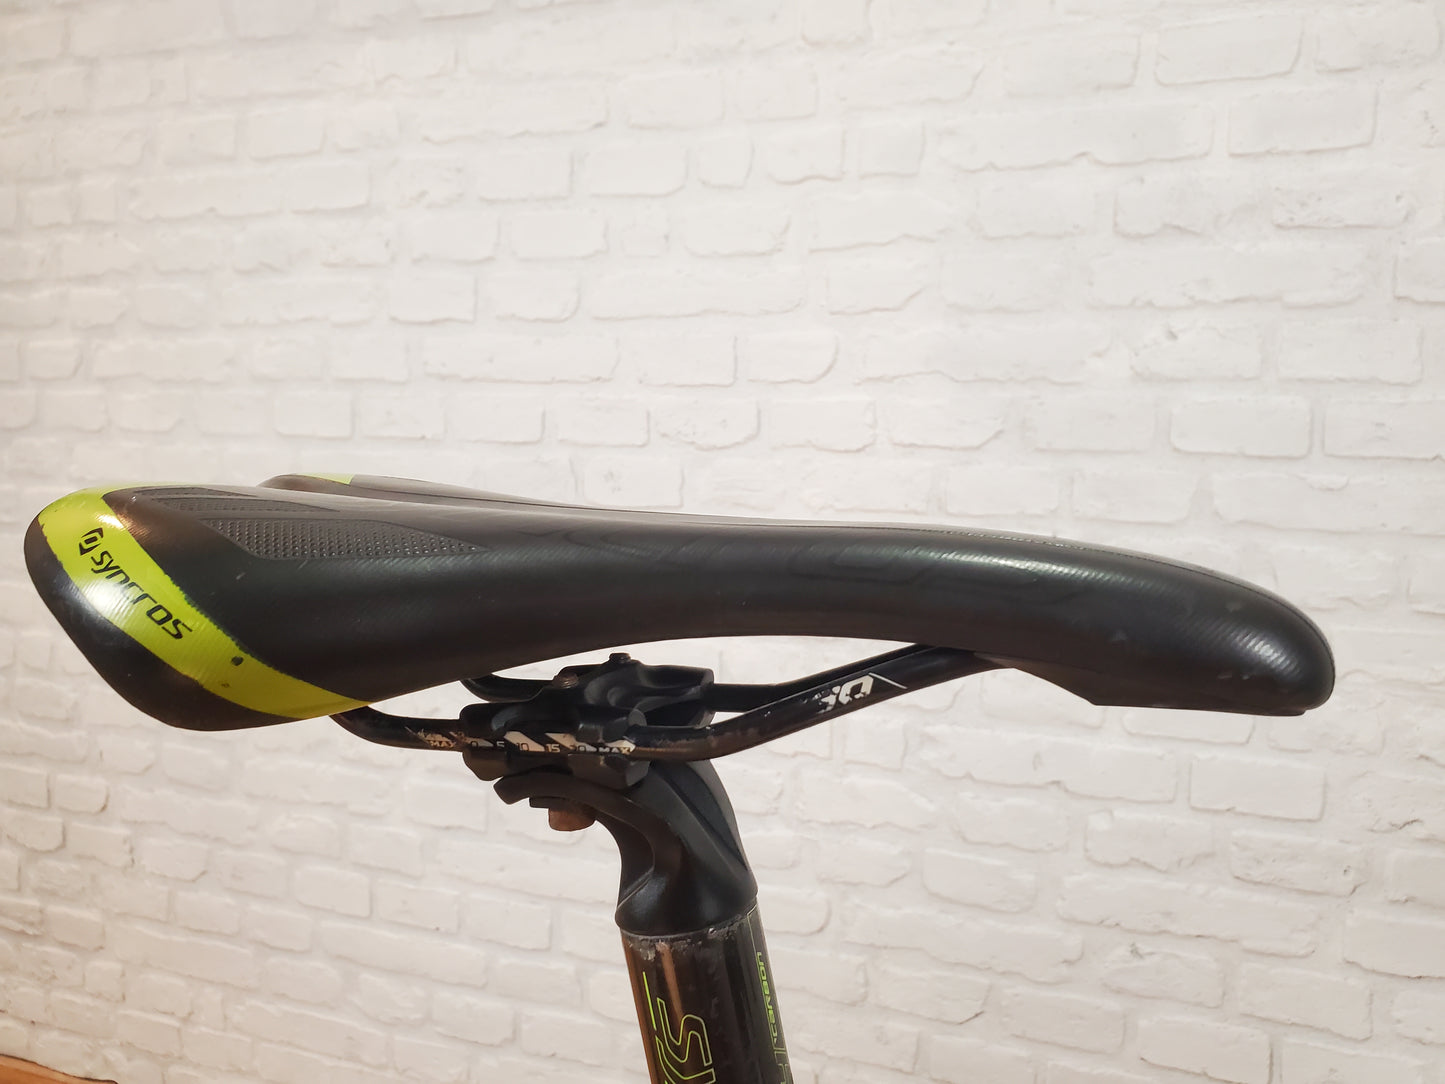 Carbon fiber seat post with a Syncros saddle.